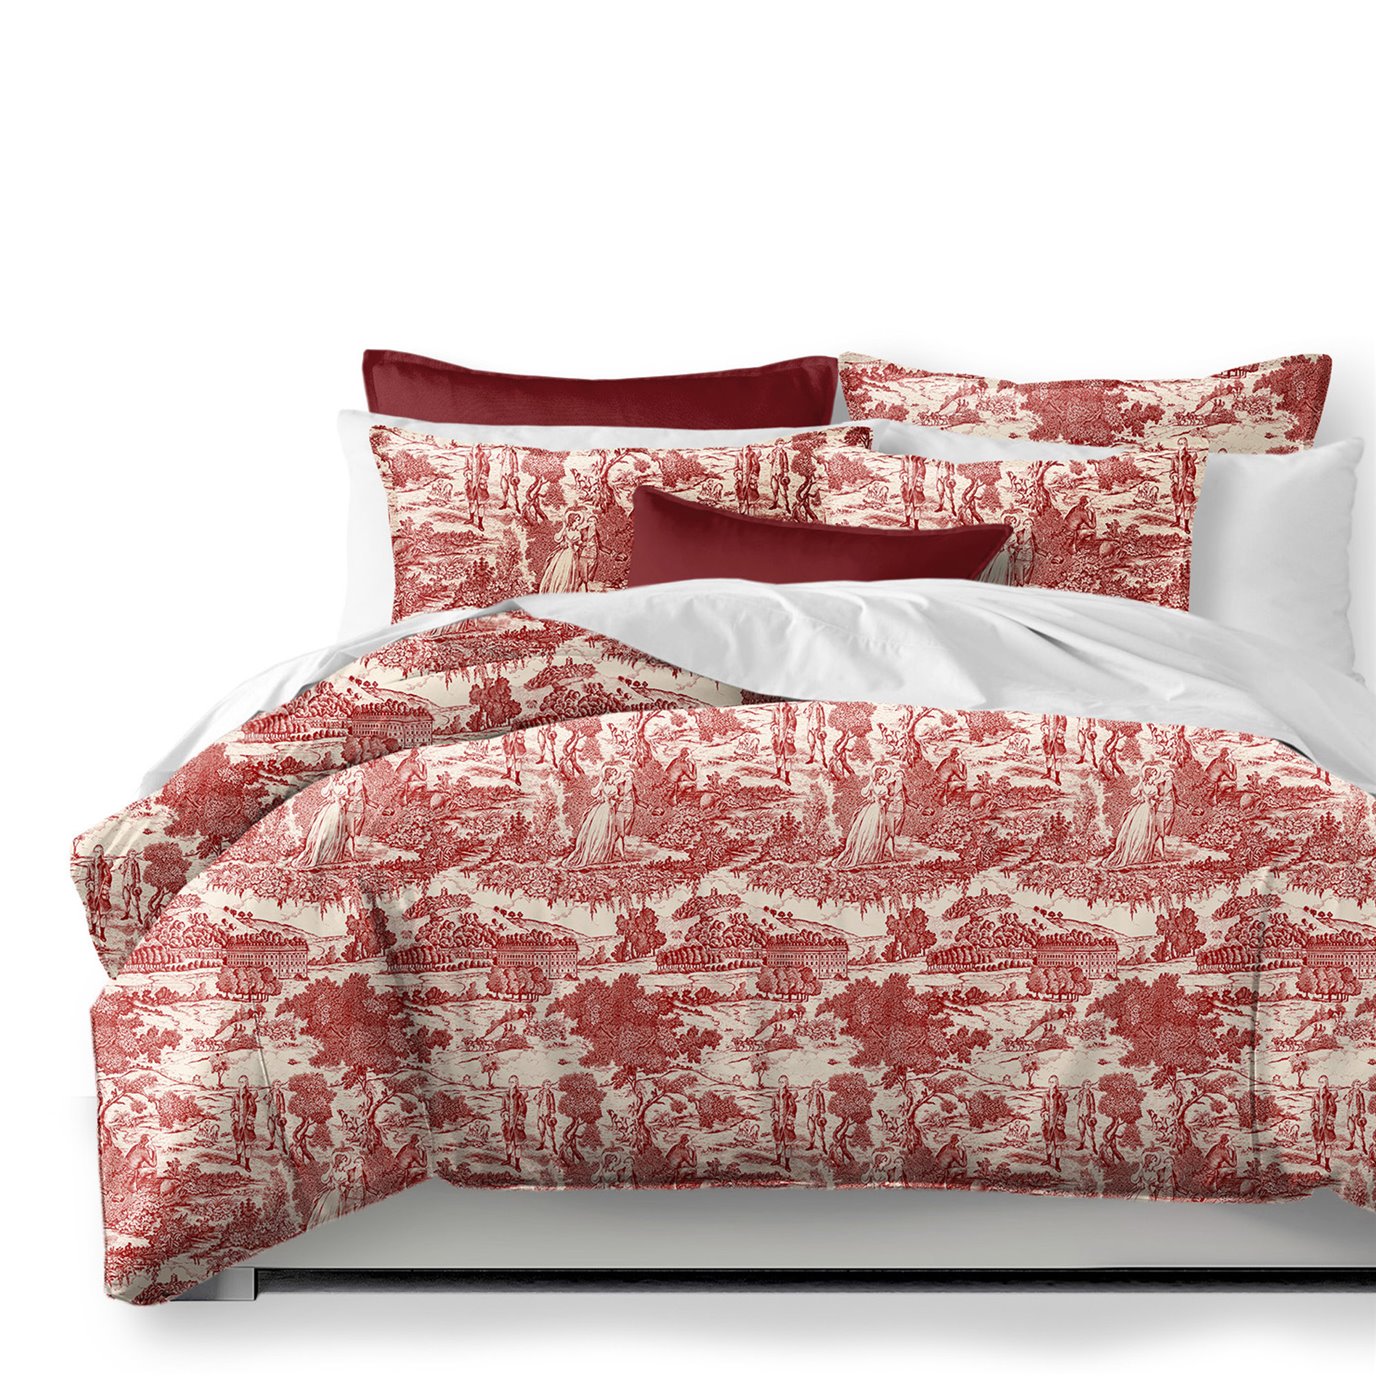 Beau Toile Red Duvet Cover and Pillow Sham(s) Set - Size Full